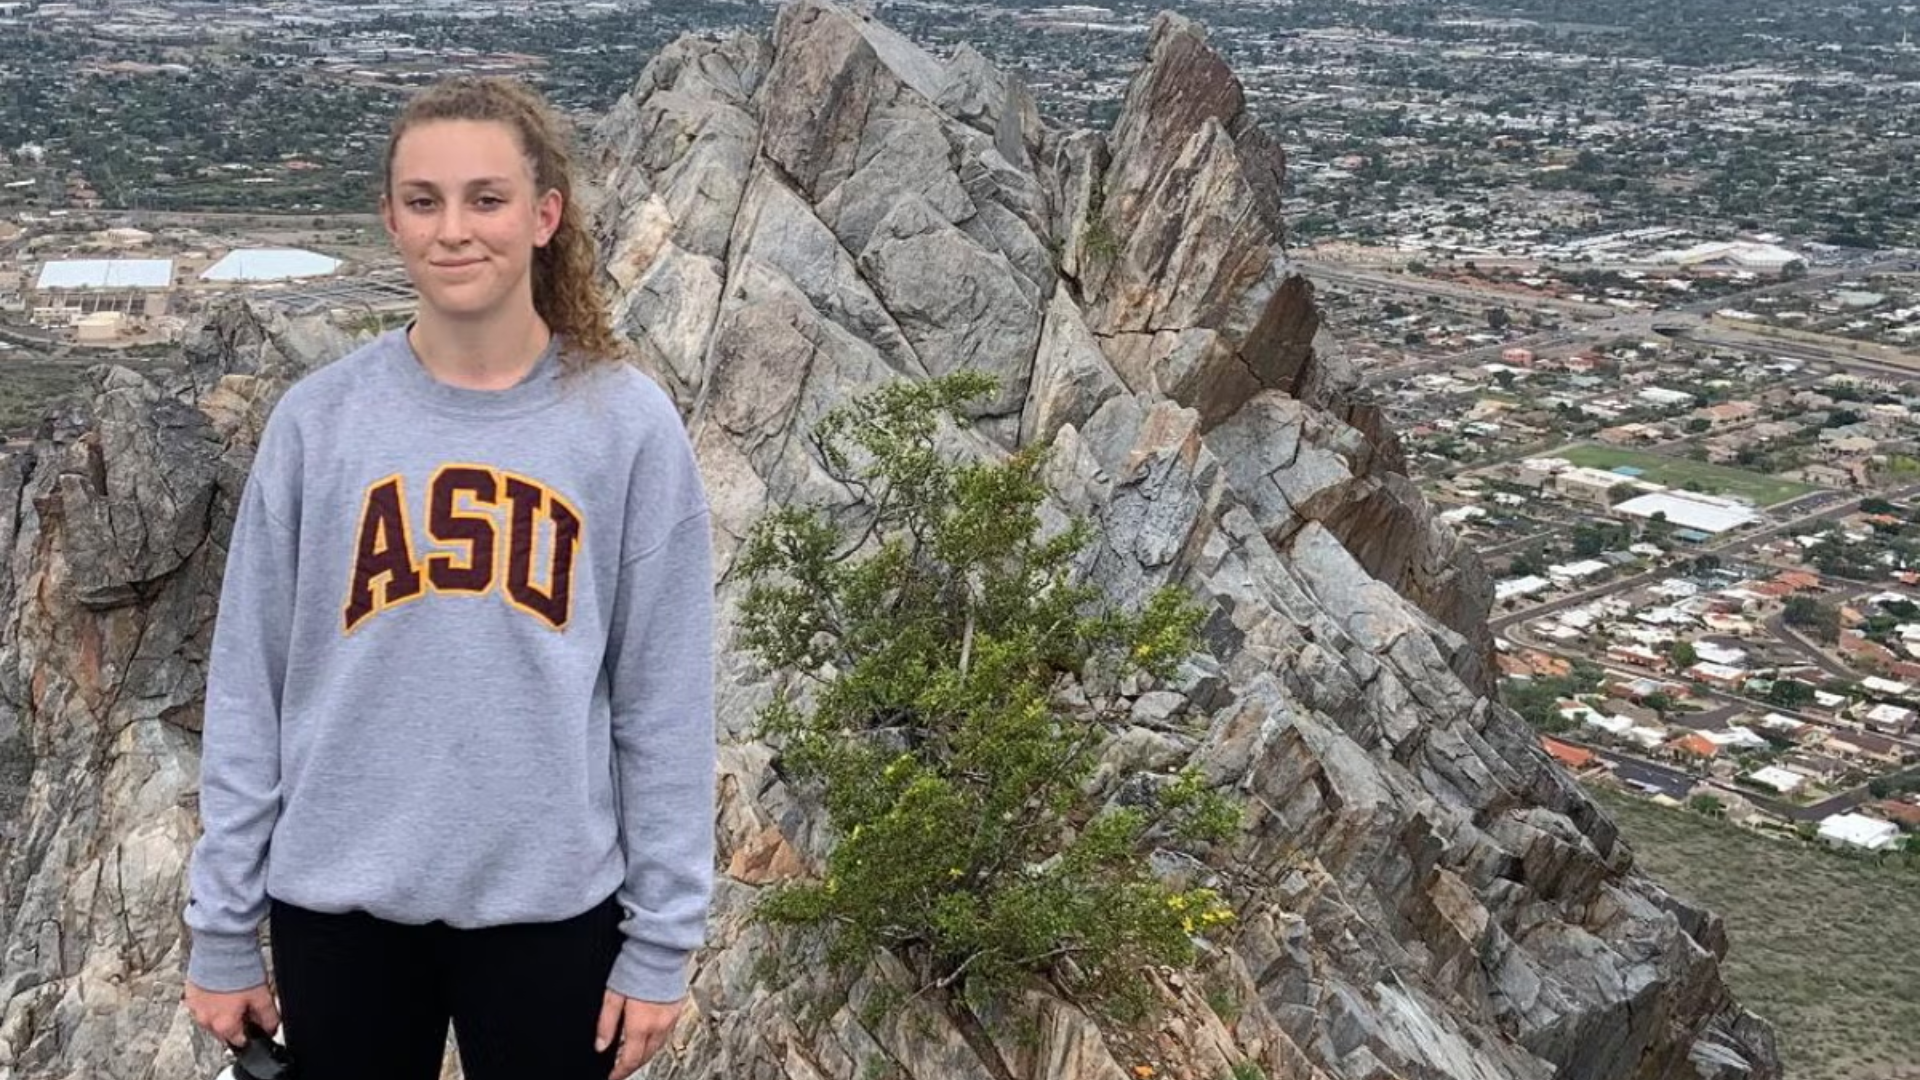 ASU Student Dies After Slipping on Half Dome During Storm